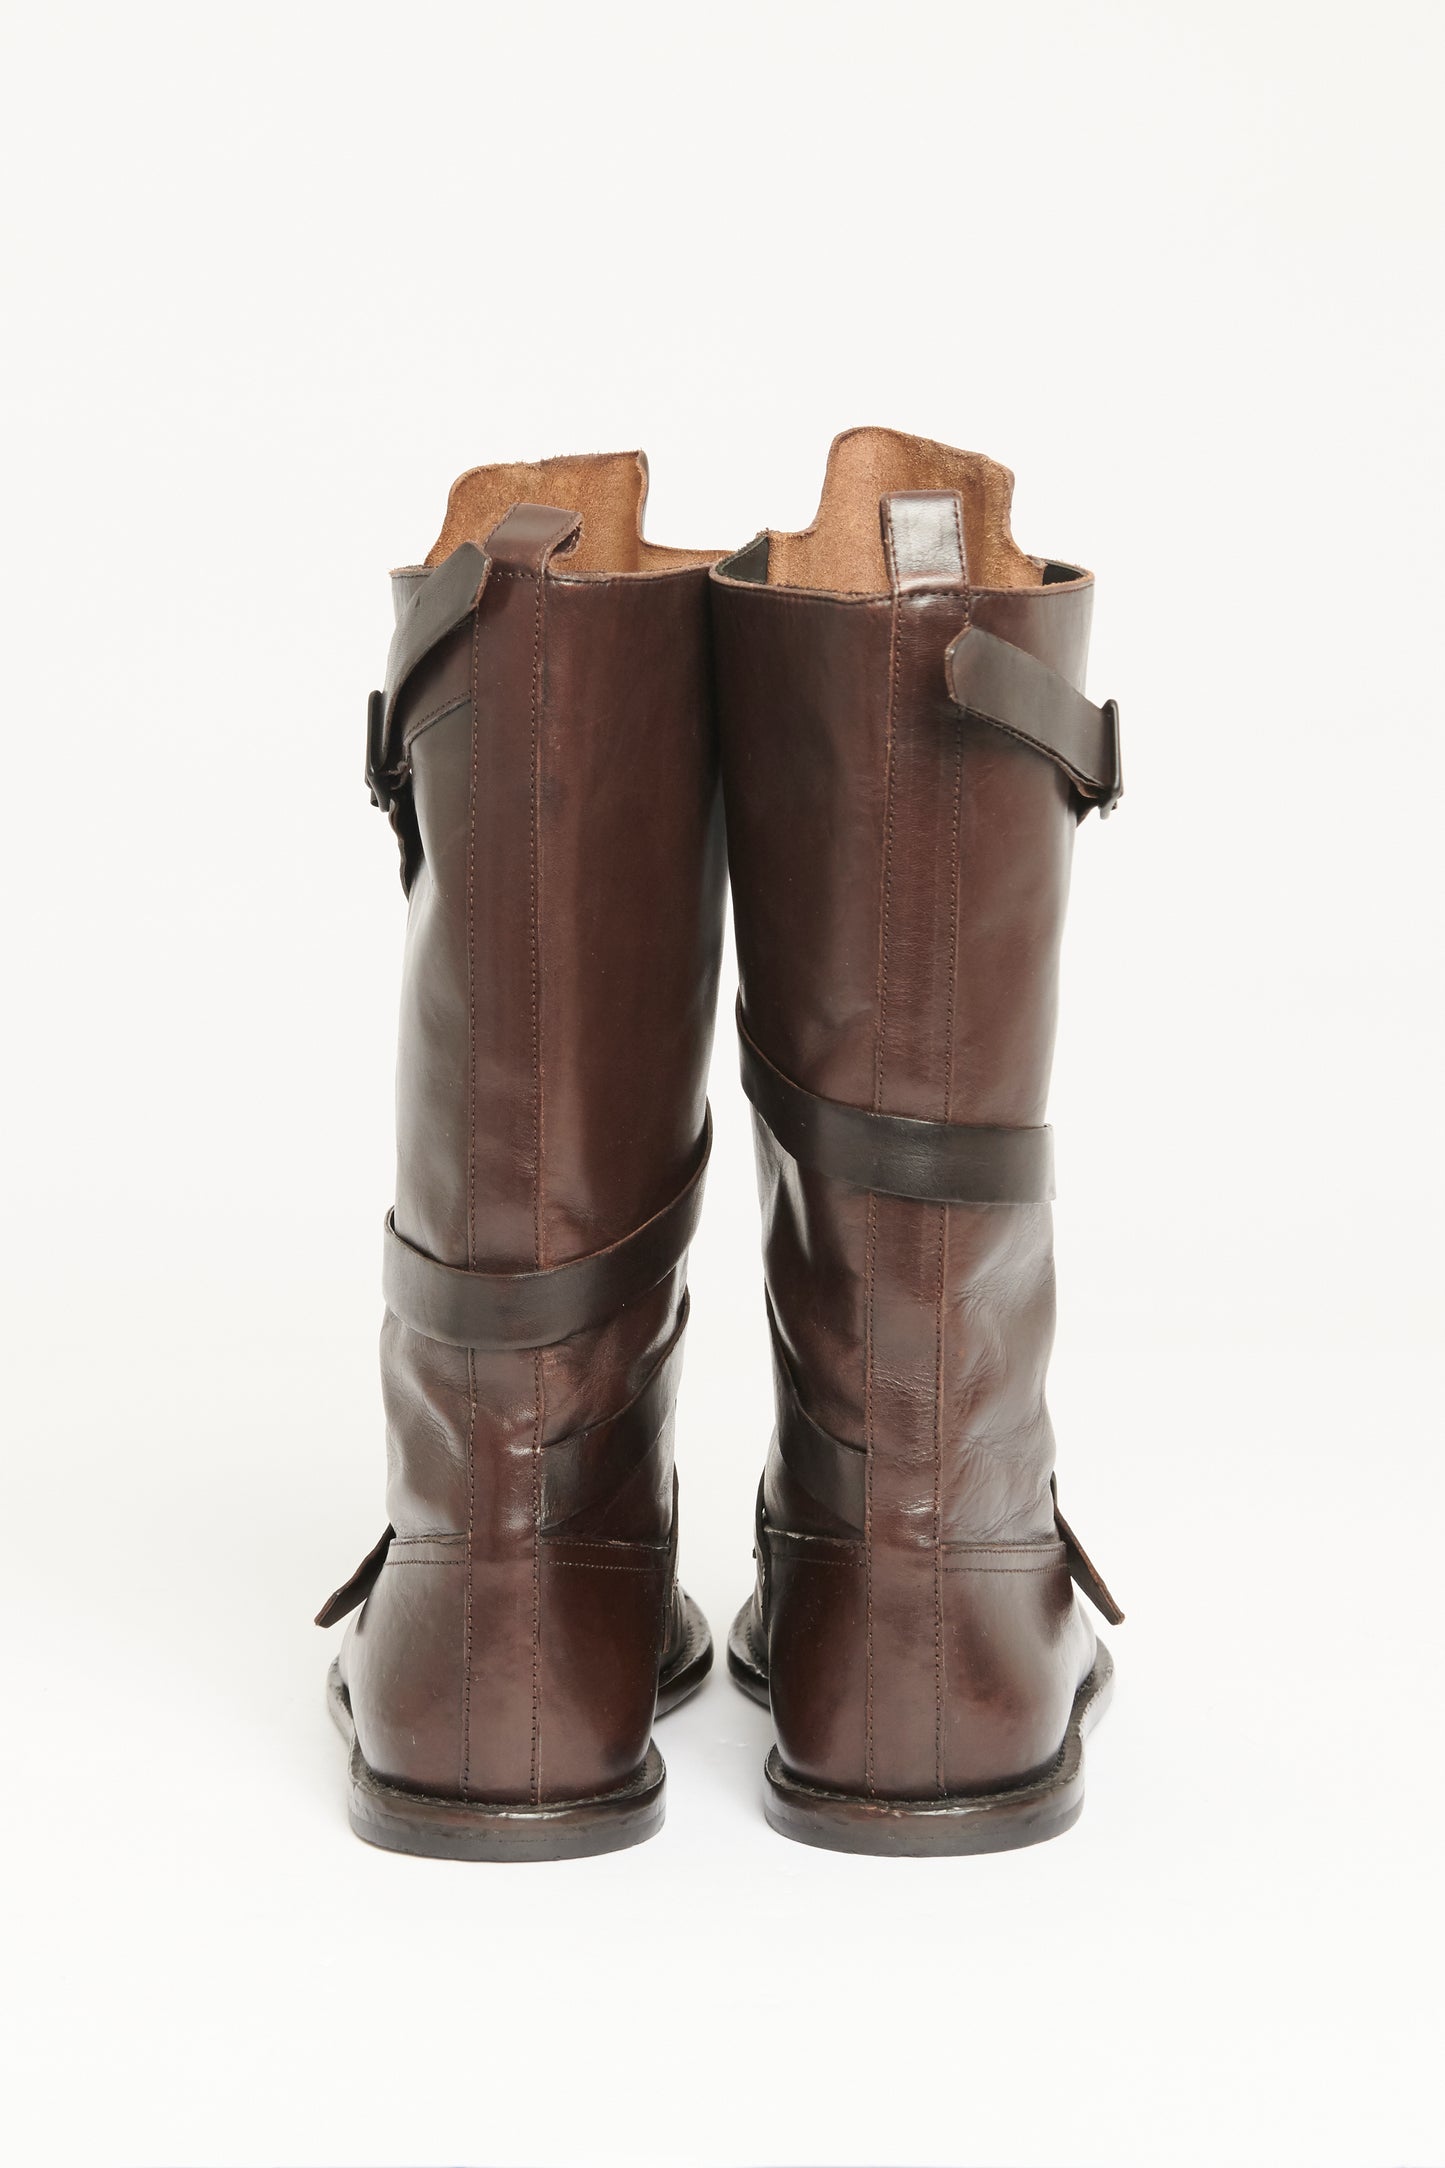 Burgundy Leather Preowned Calf Boots